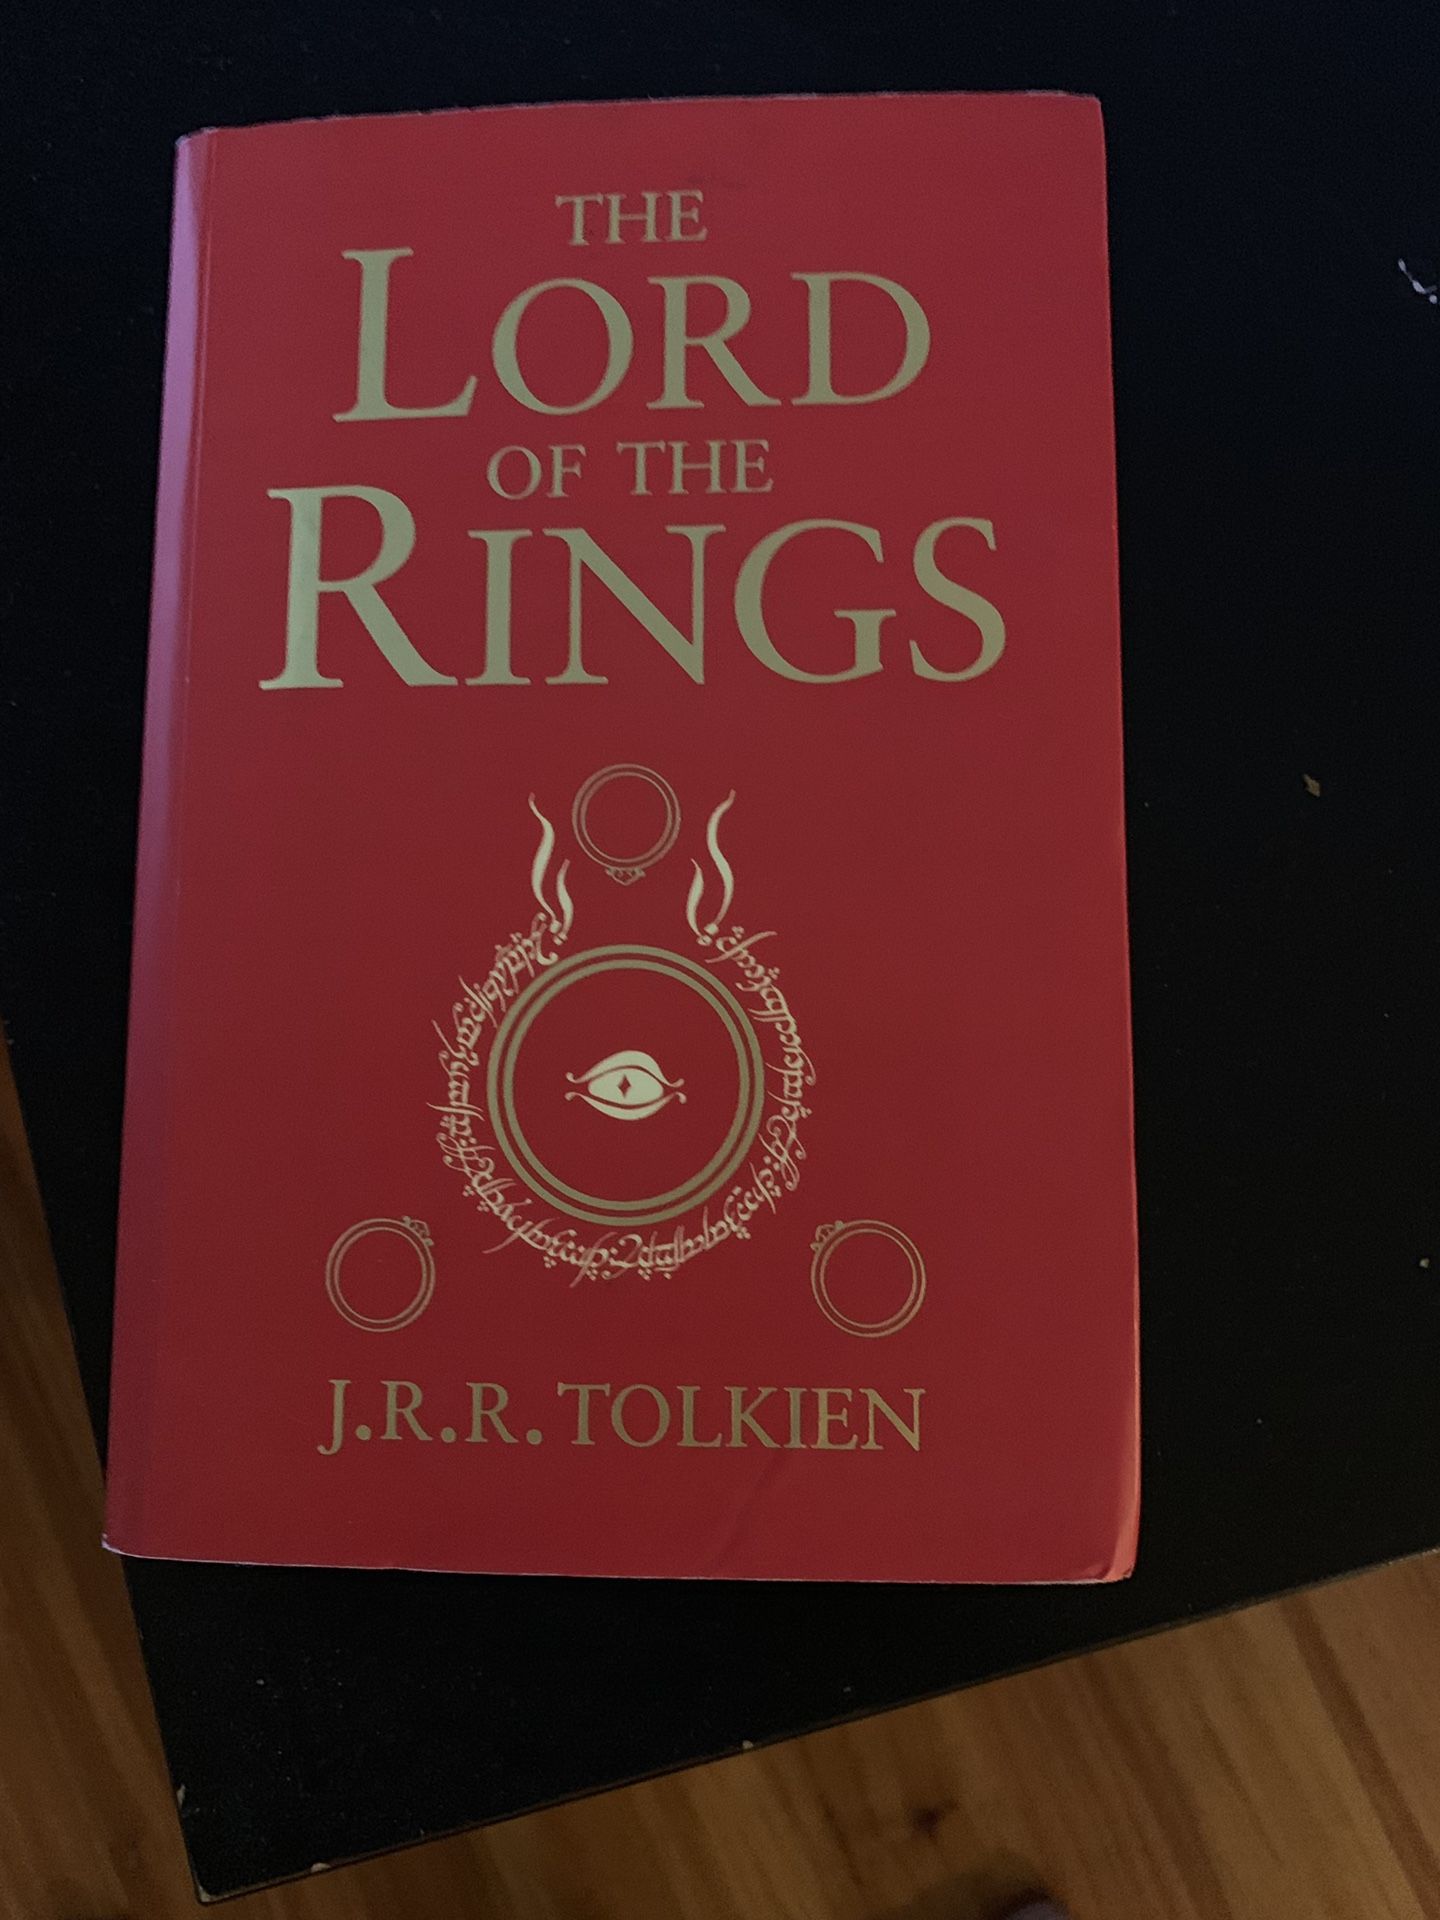 Lord of the rings trilogy by Tolkien